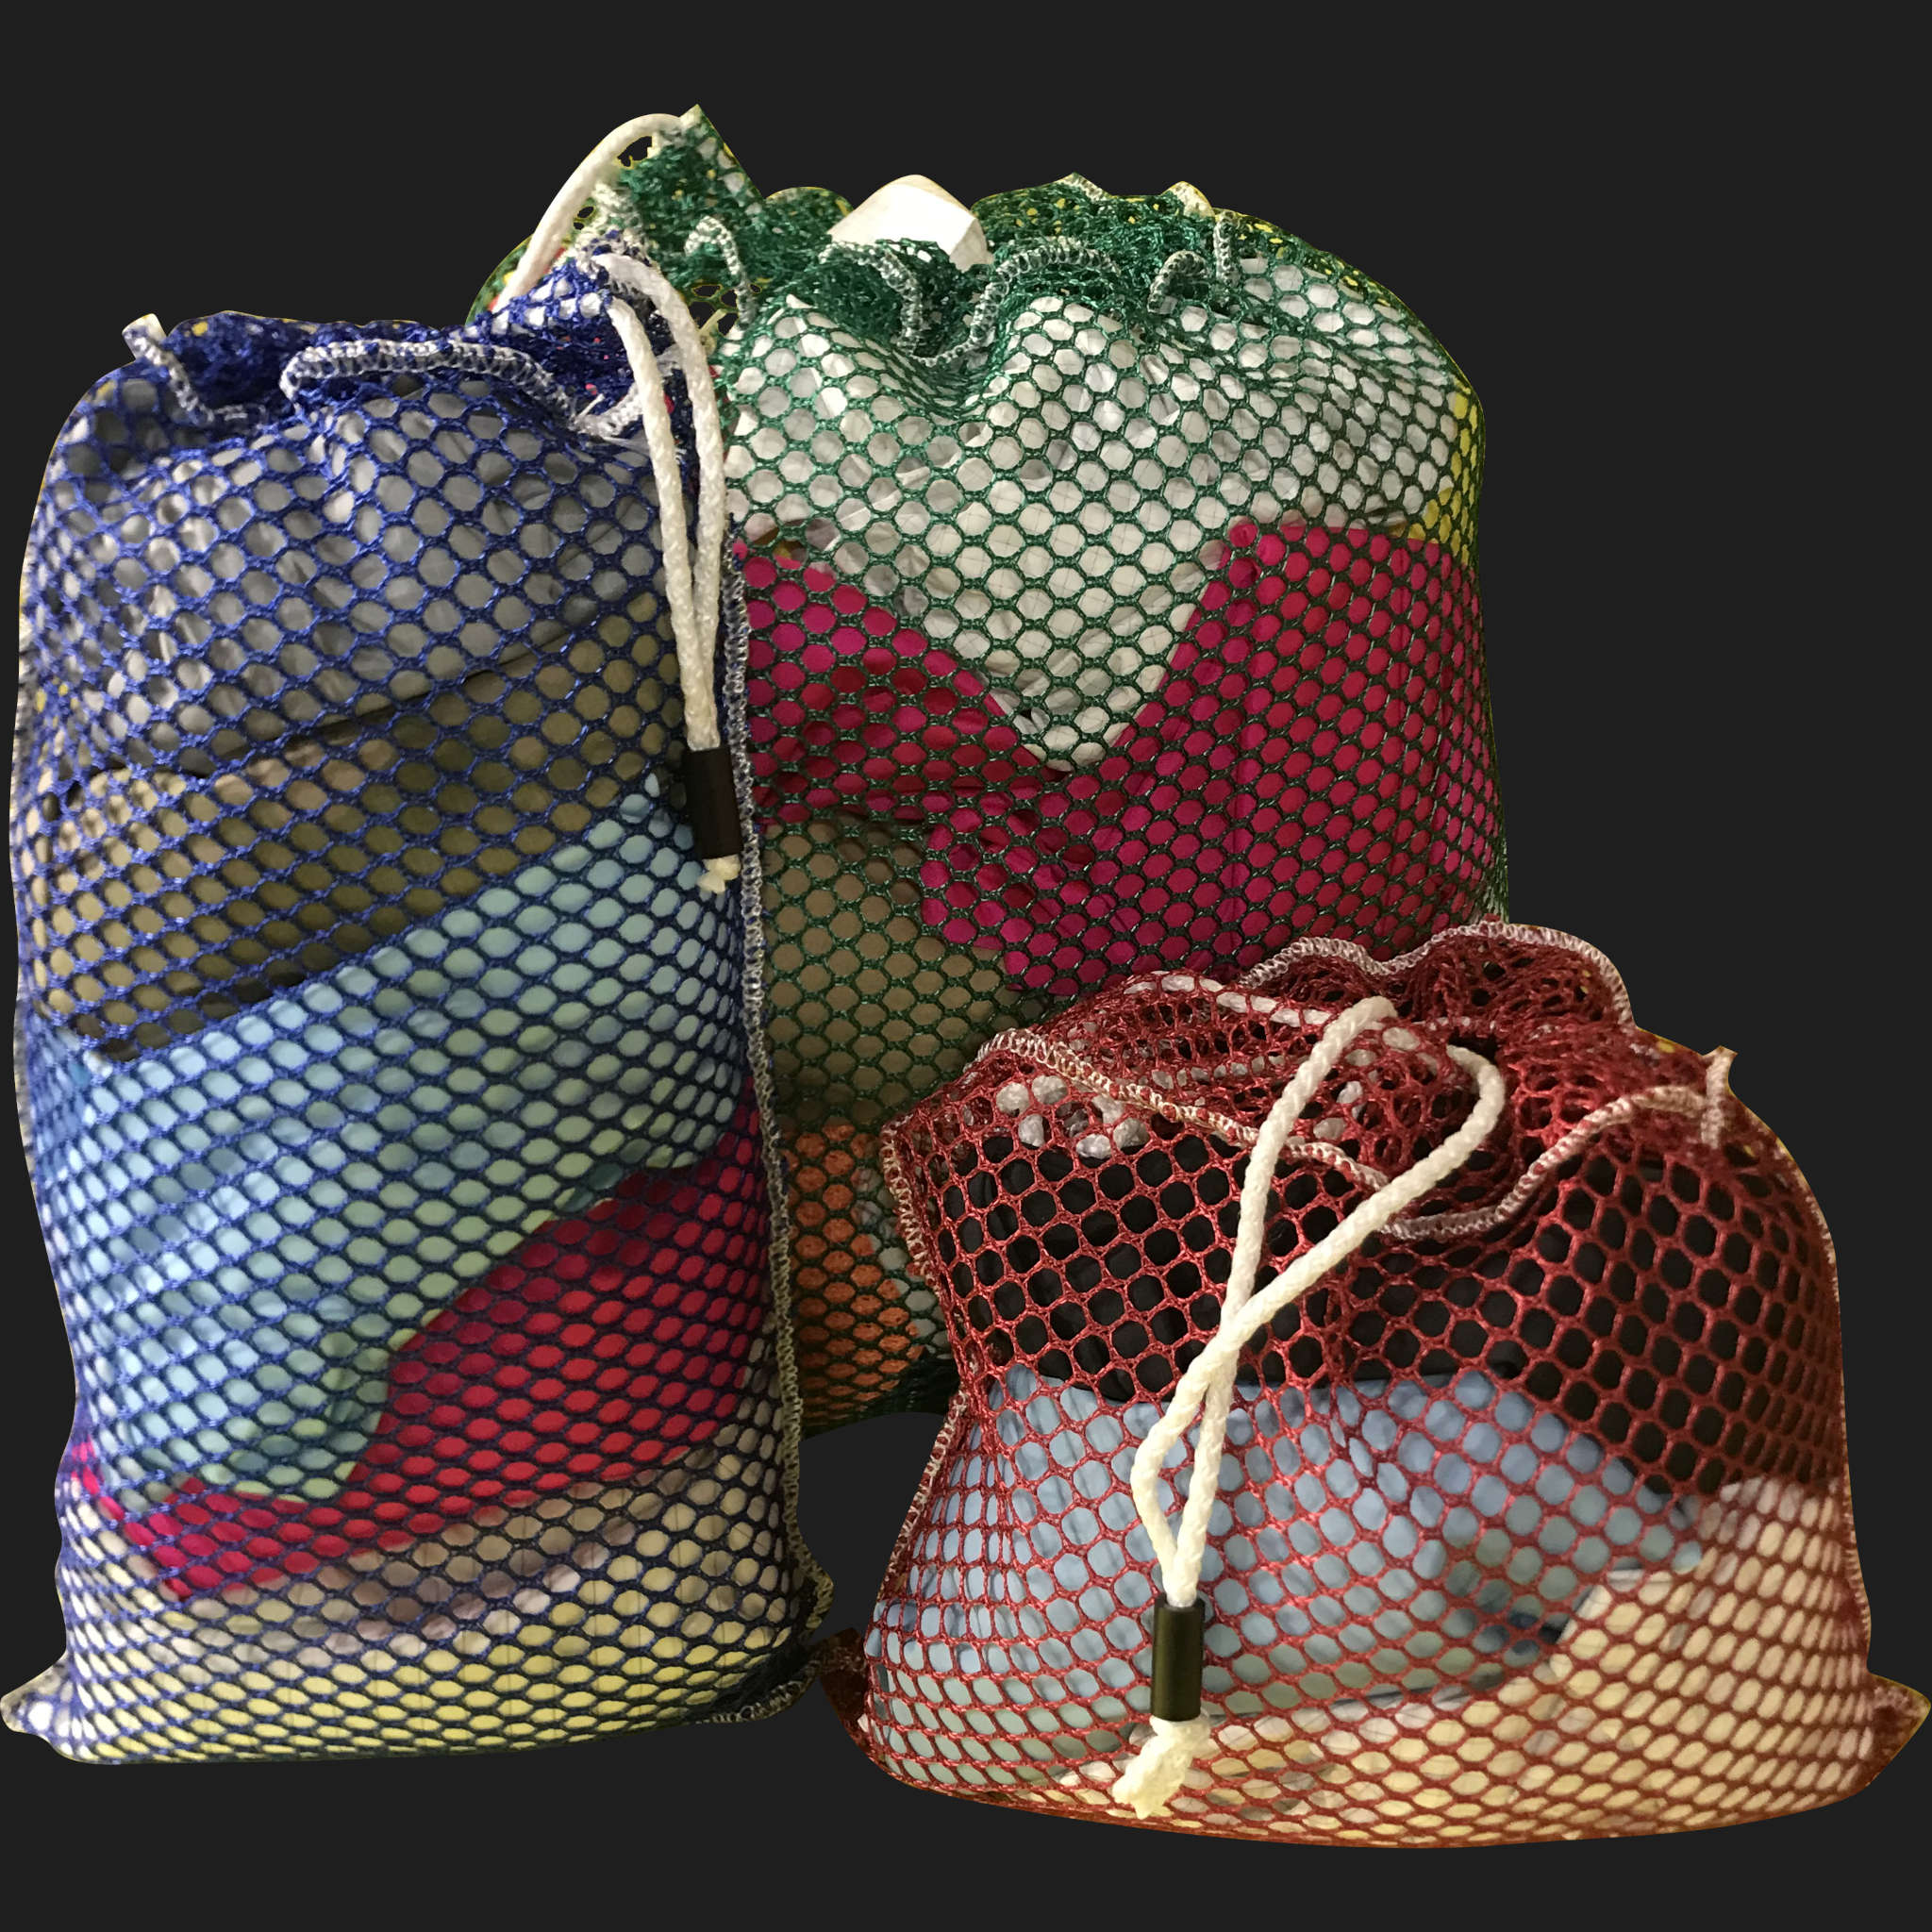 28" x 40" Customized Mesh-Net-Laundry Bags Heavy Duty with Cord and barrellock closure